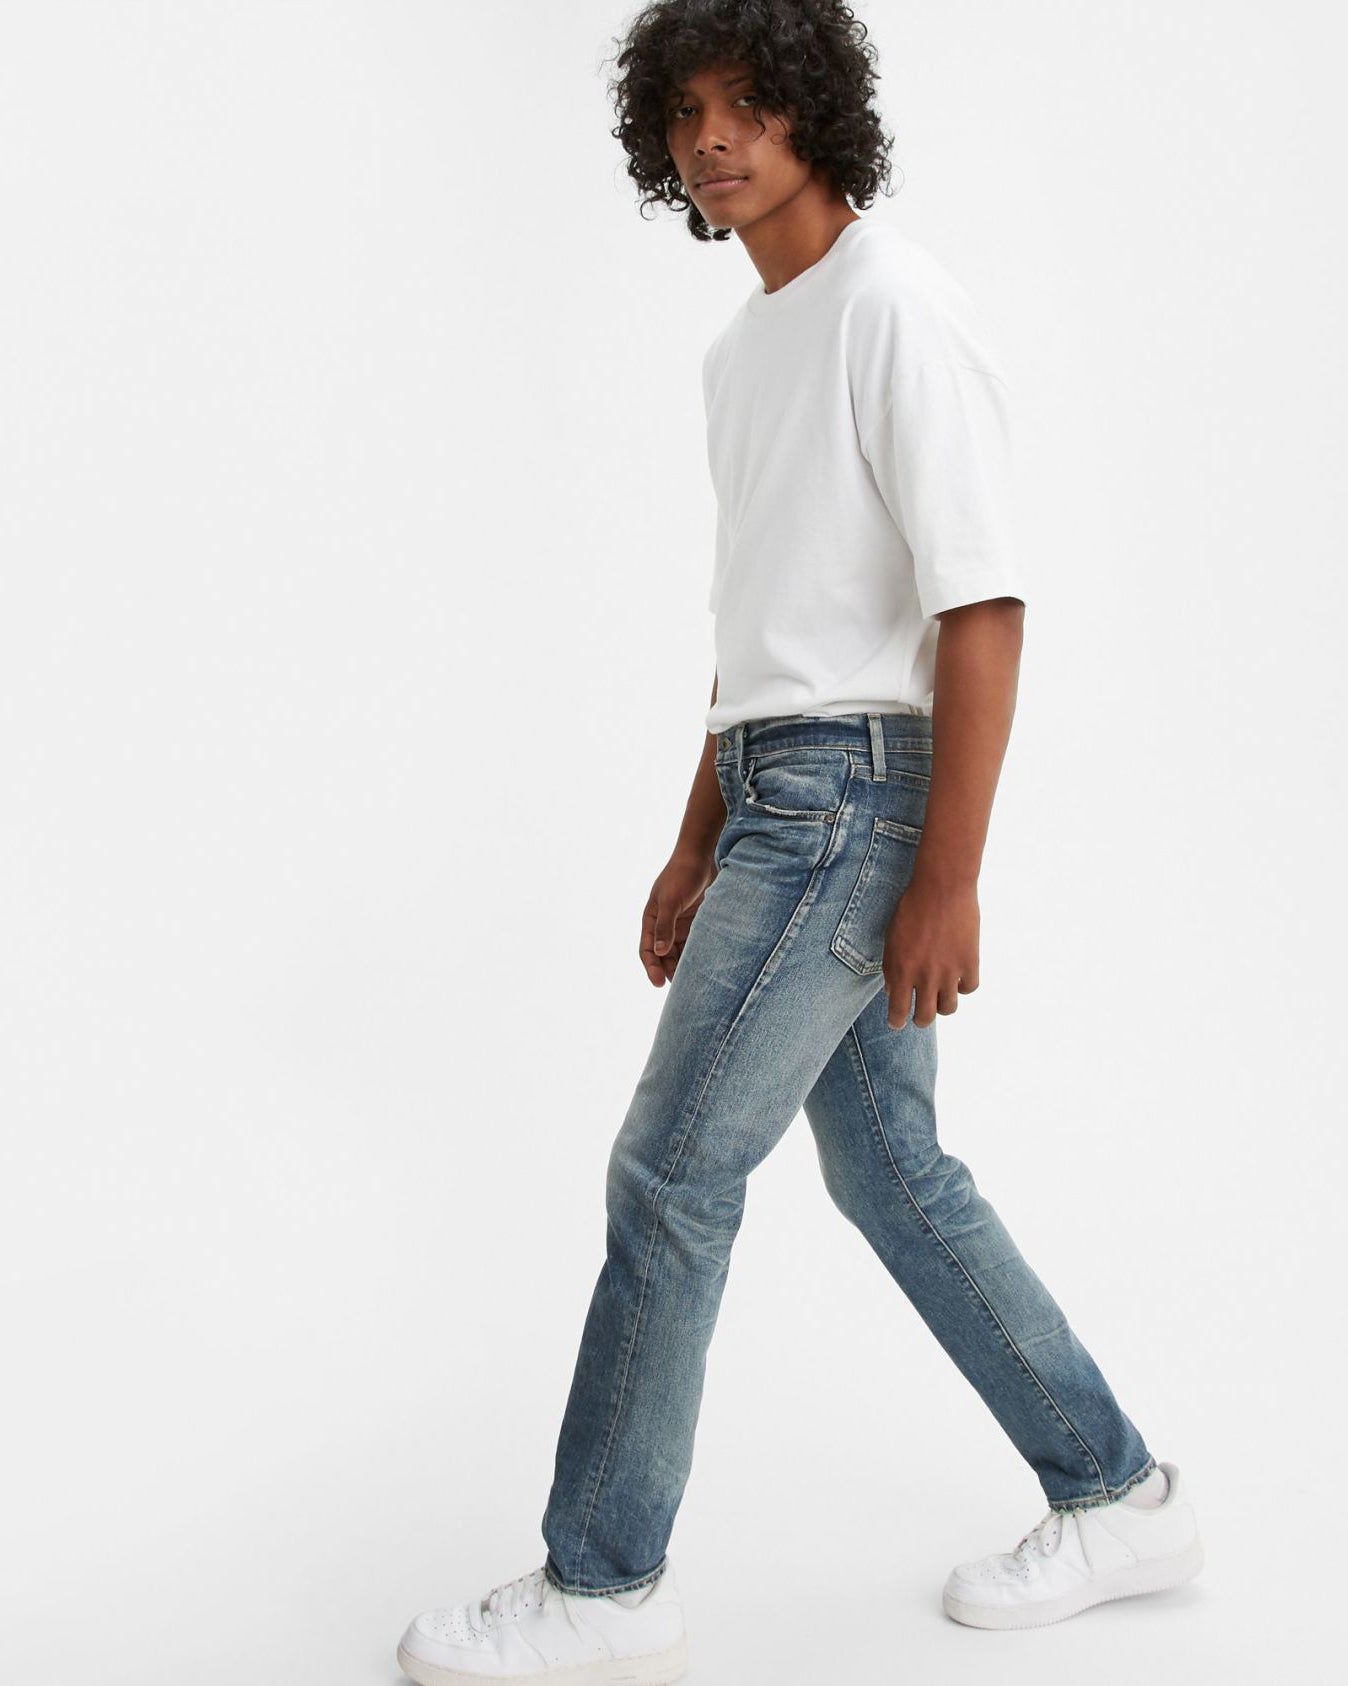 Levi's® Made & Crafted® Made In Japan 502 Regular Tapered Selvedge Jea ...